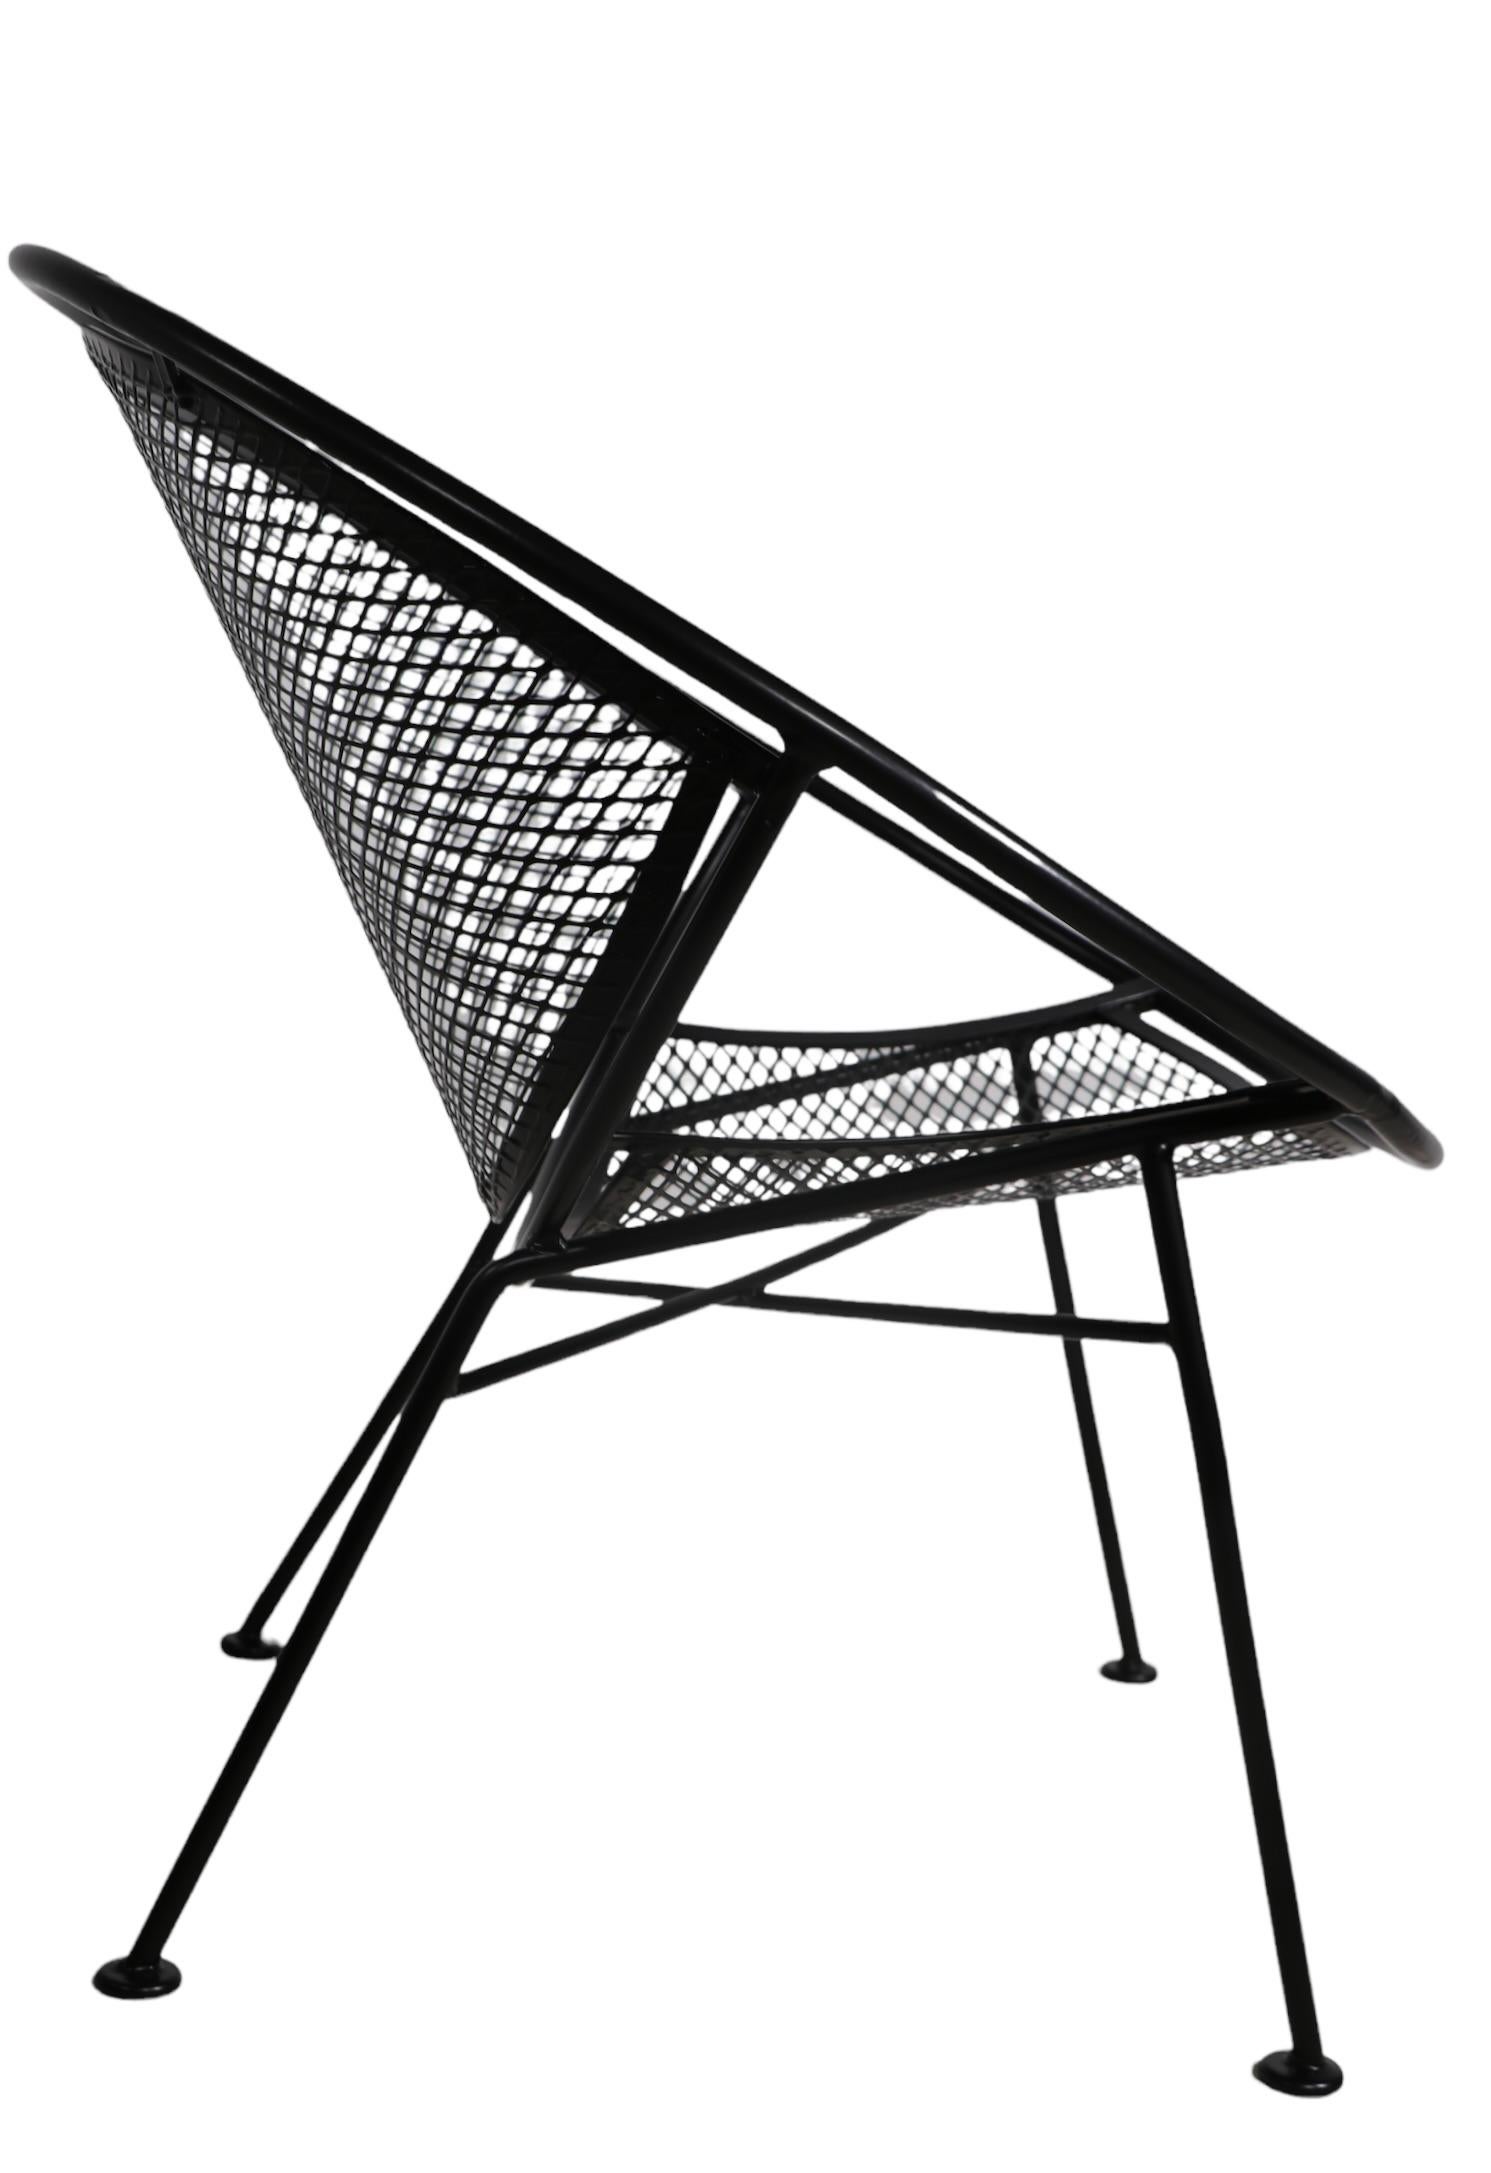 Wrought Iron Mid Century Garden Patio Poolside Radar Lounge Chair by Salterini Powder Coated For Sale